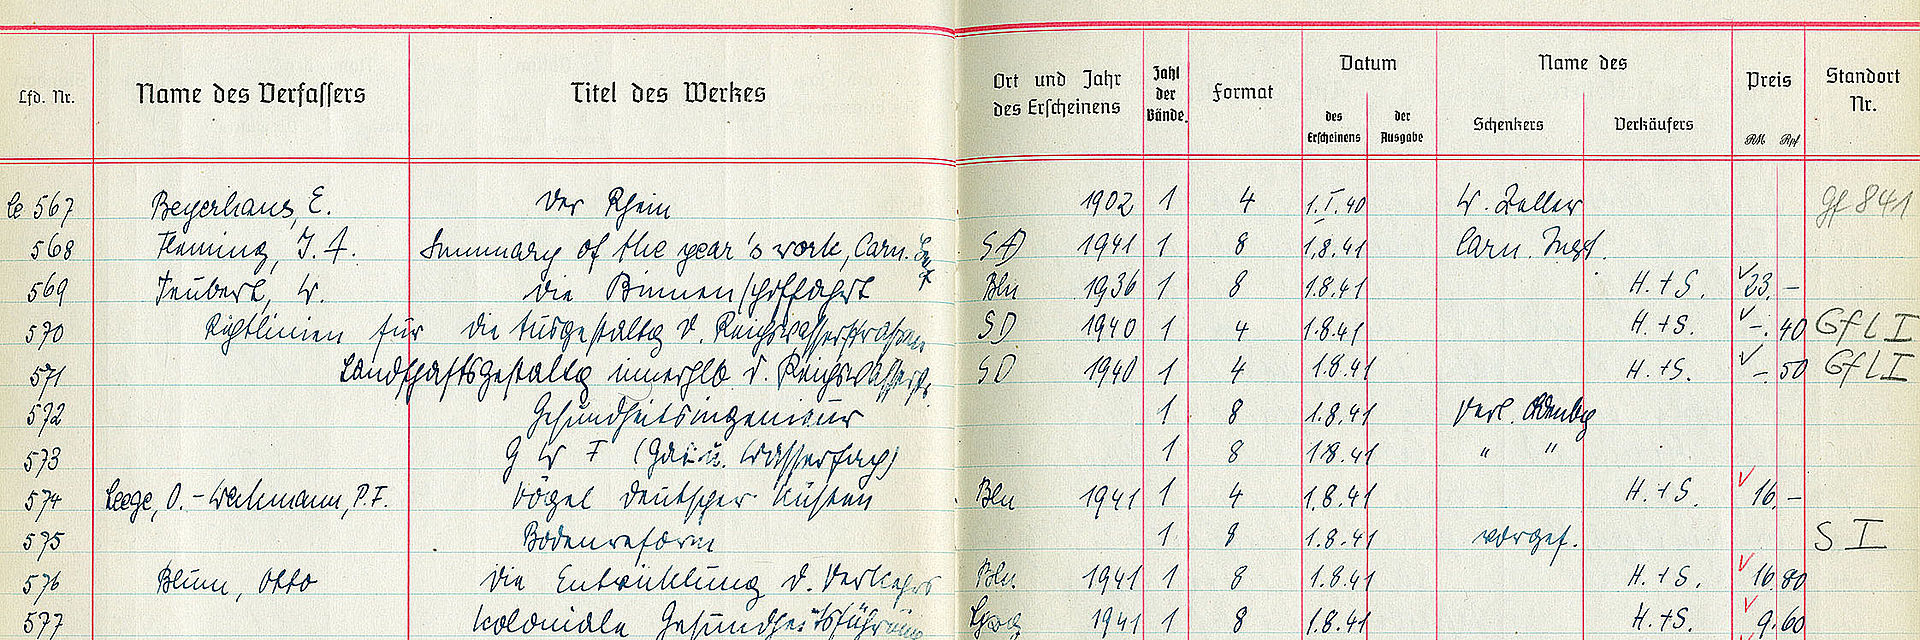 Double page from the accession register of the Museum für Meereskunde showing bibliographical details, provenance data and purchase prices.